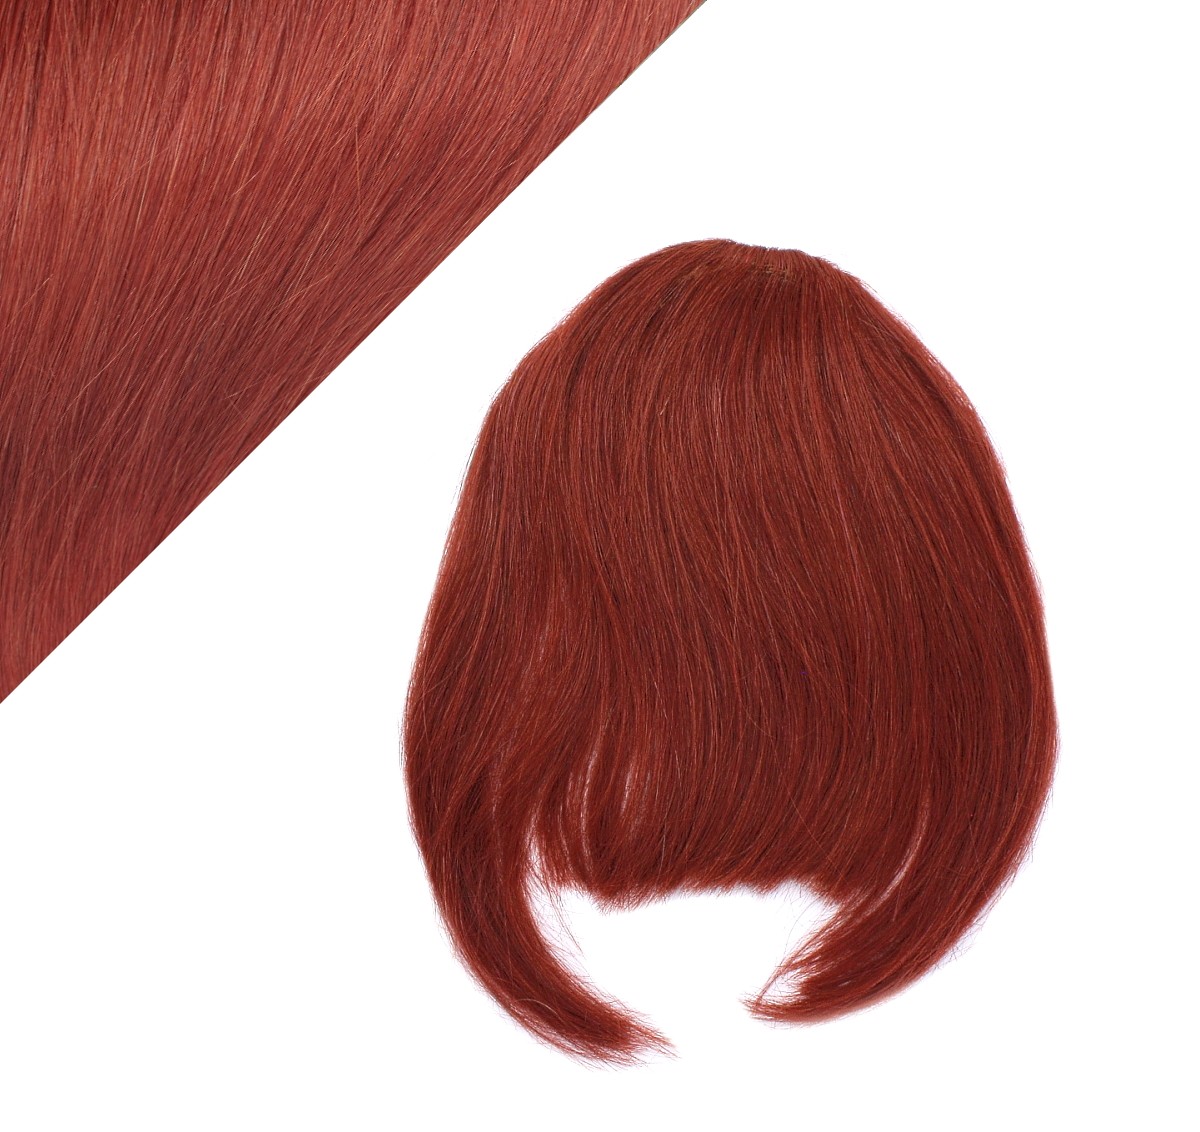 Clip in bang/fringe human hair remy – copper red - Clip Hair Sale